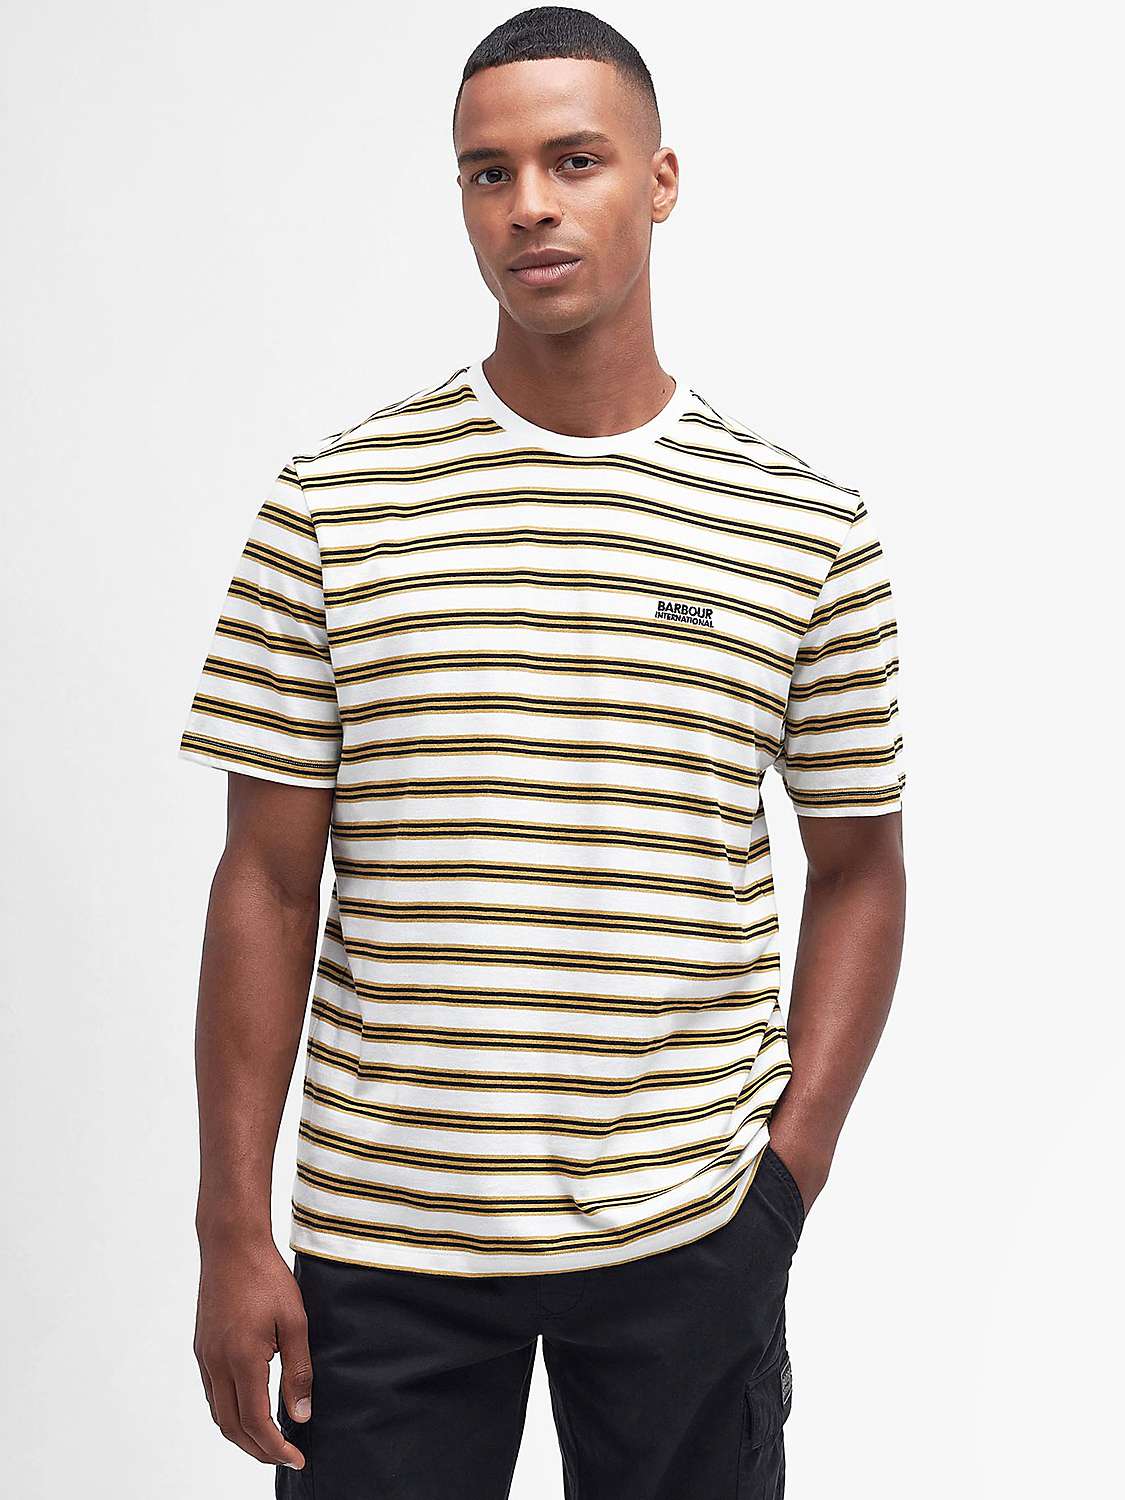 Buy Barbour International Cage T-Shirt, White/Multi Online at johnlewis.com